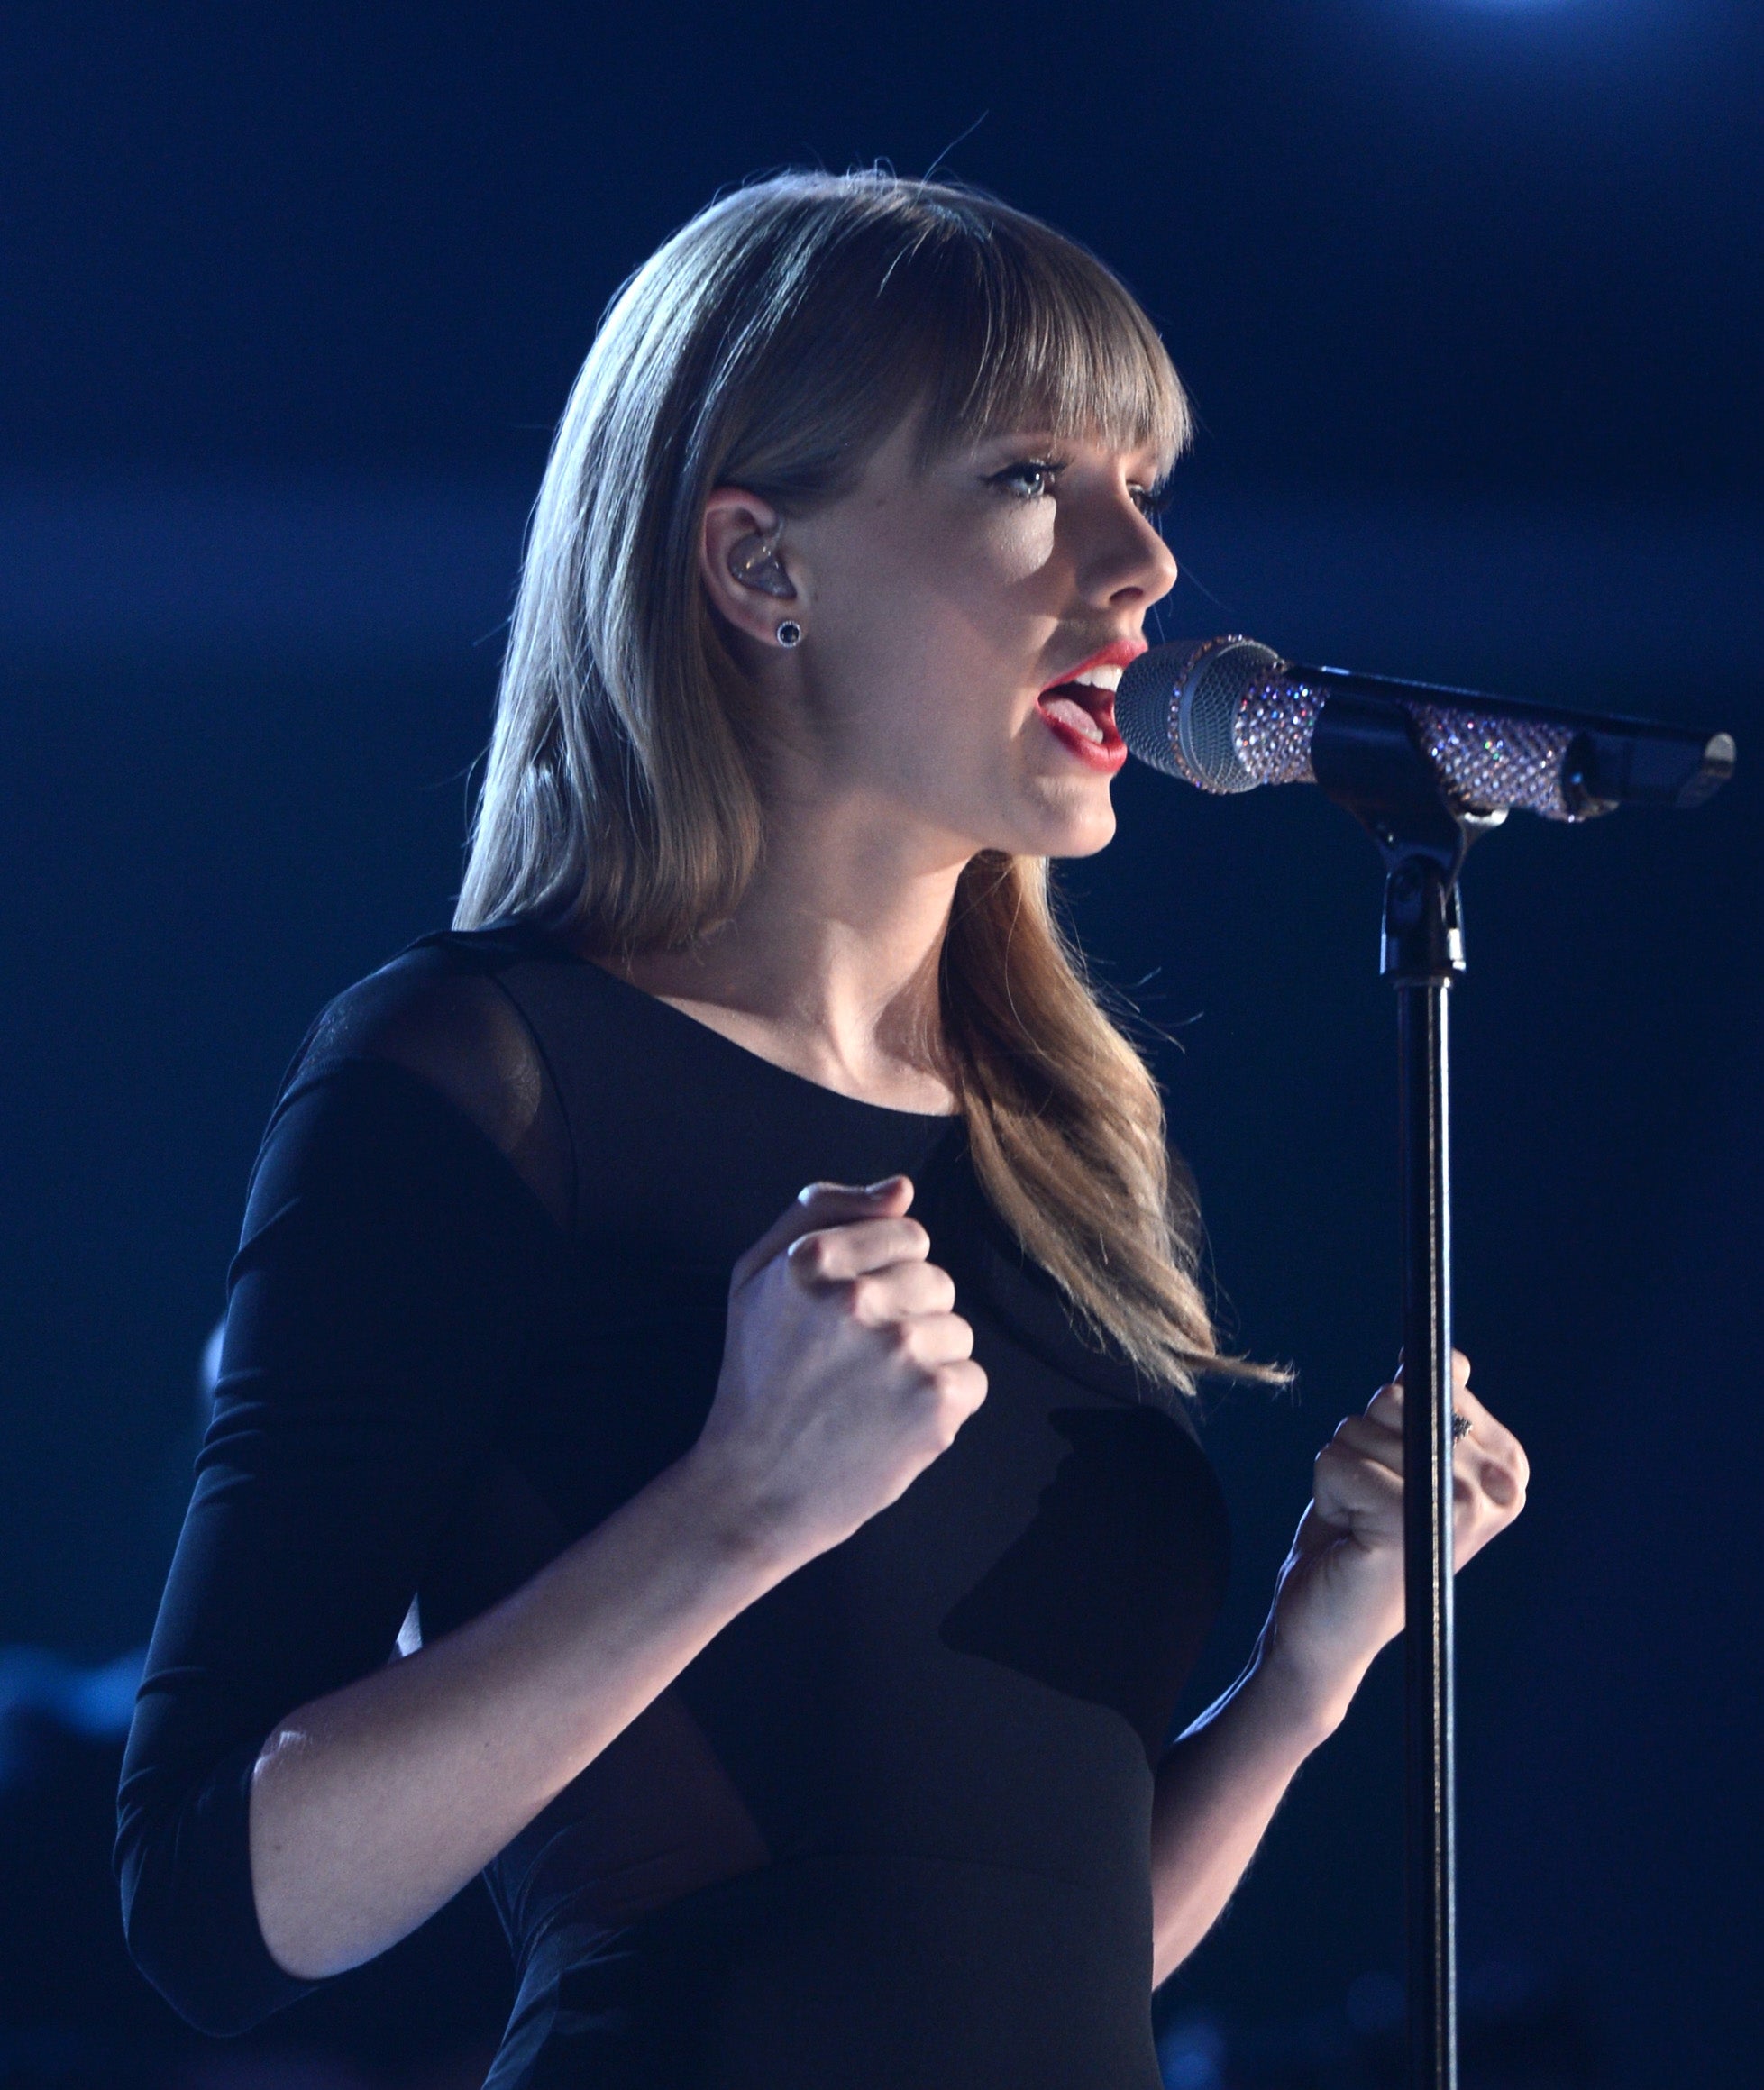 Close-up of Taylor at a microphone